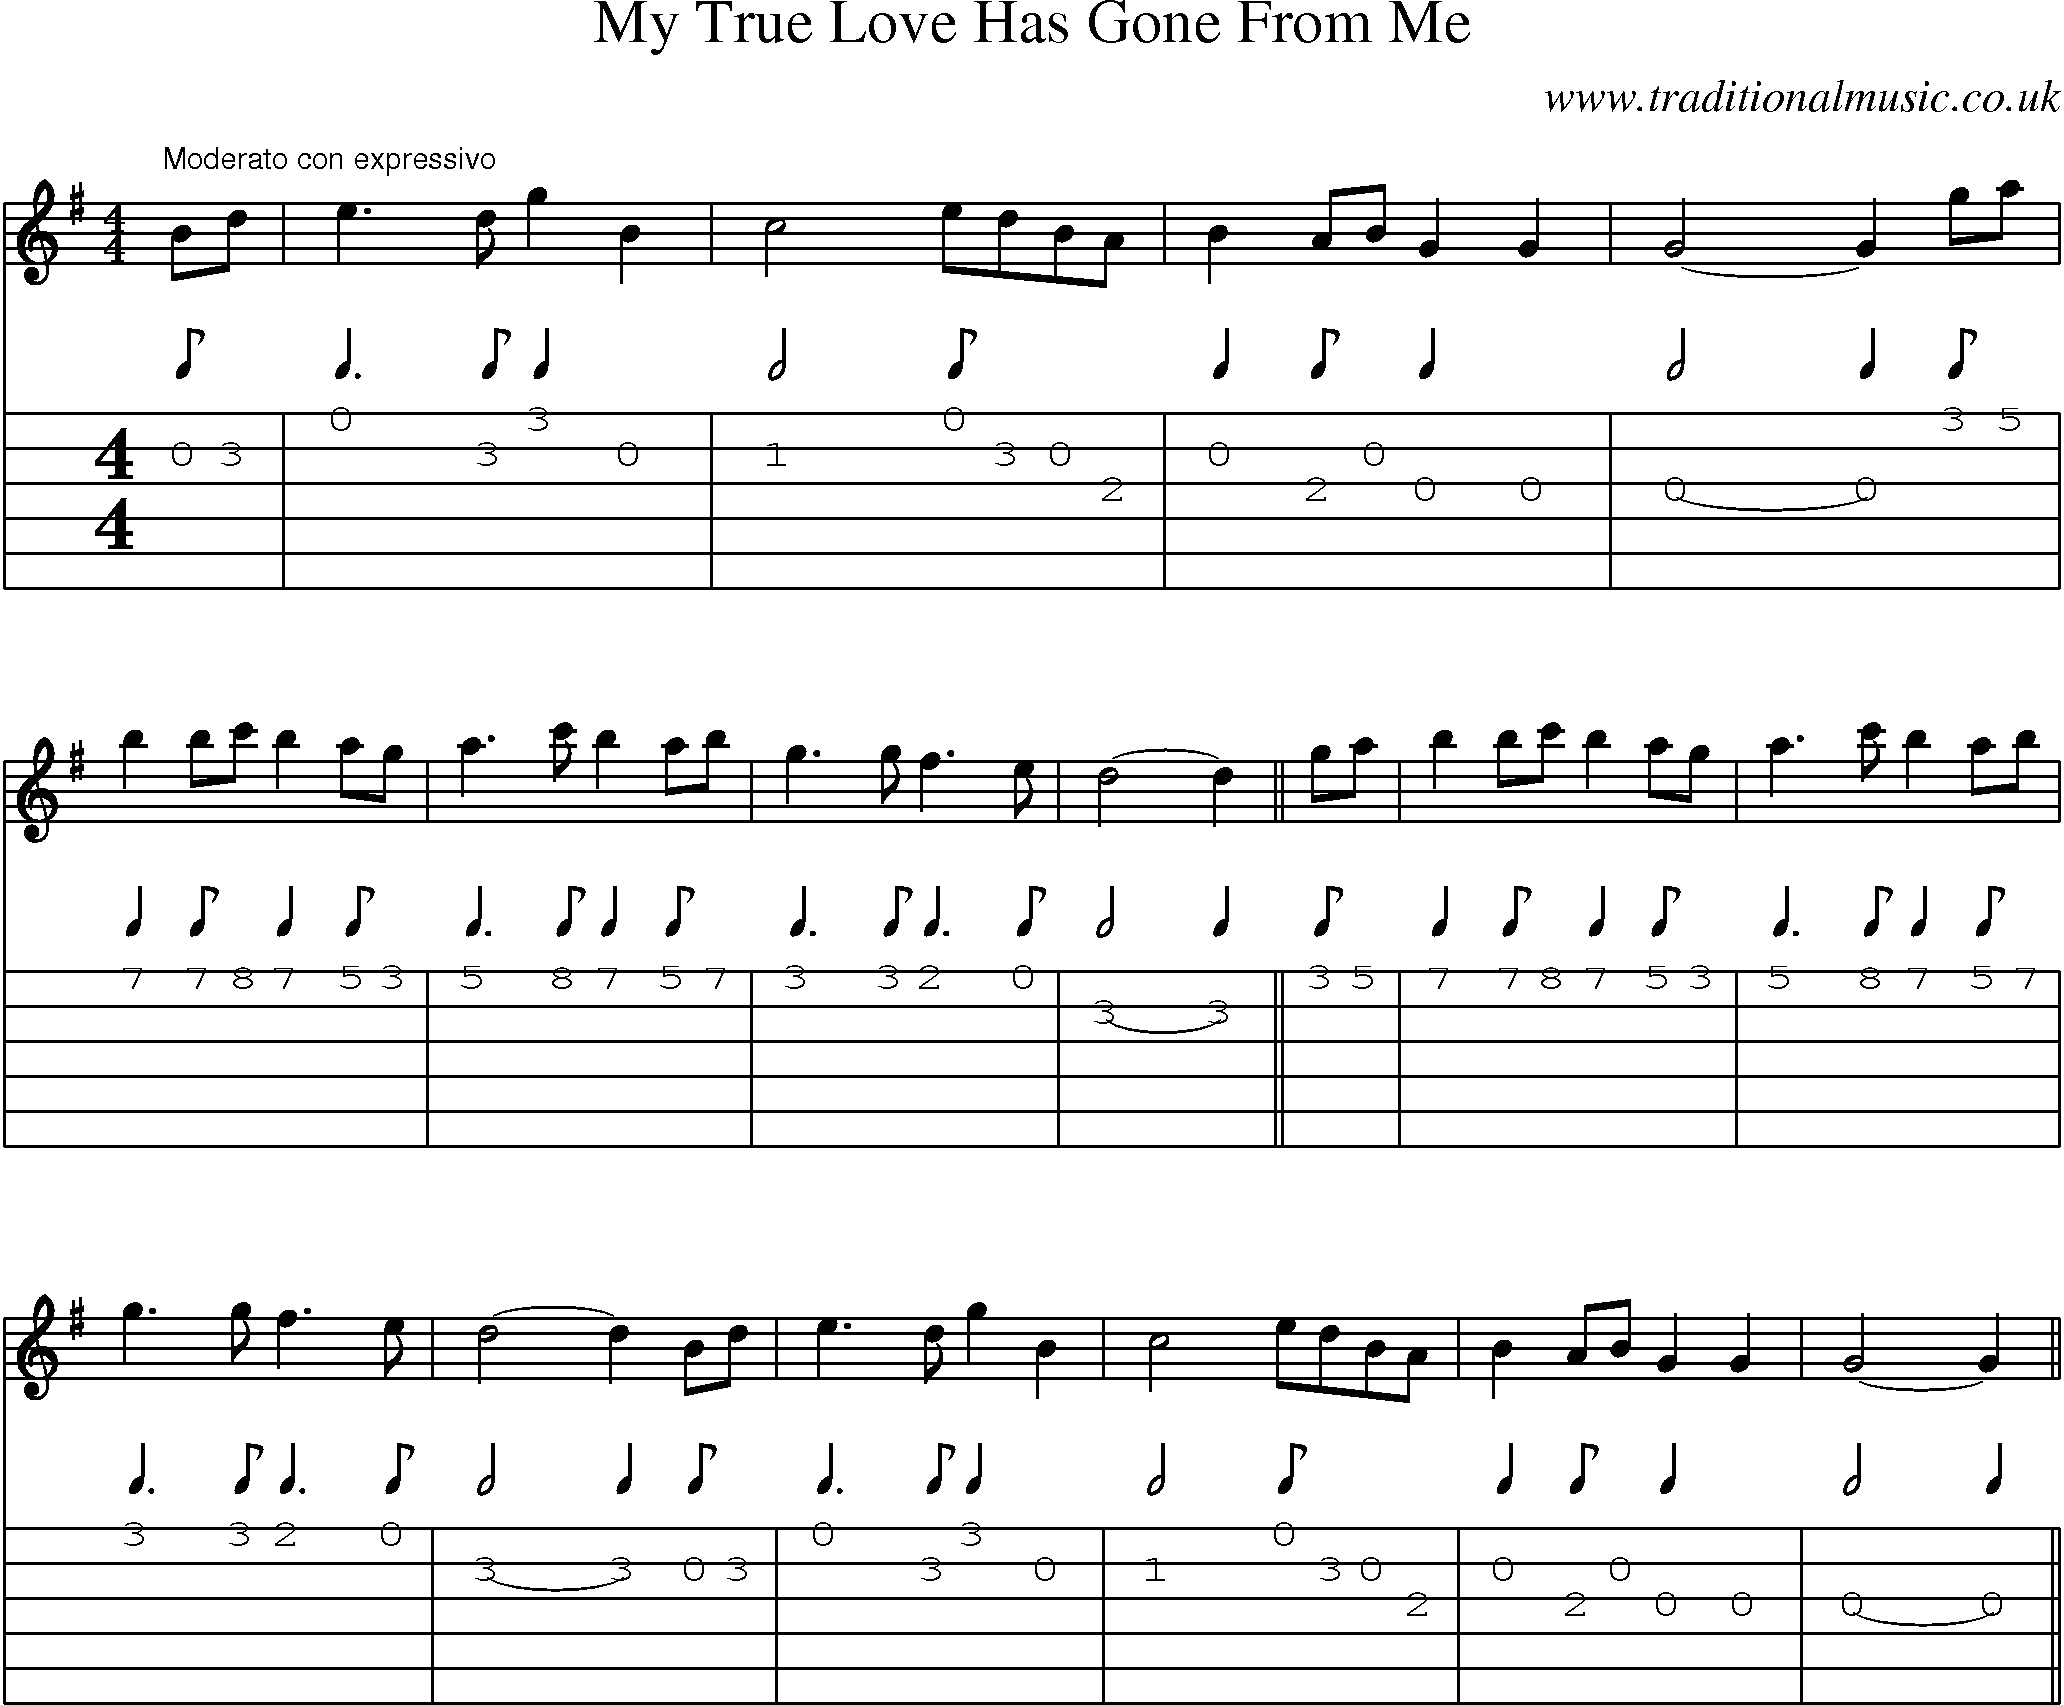 Music Score and Guitar Tabs for My True Love Has Gone From Me